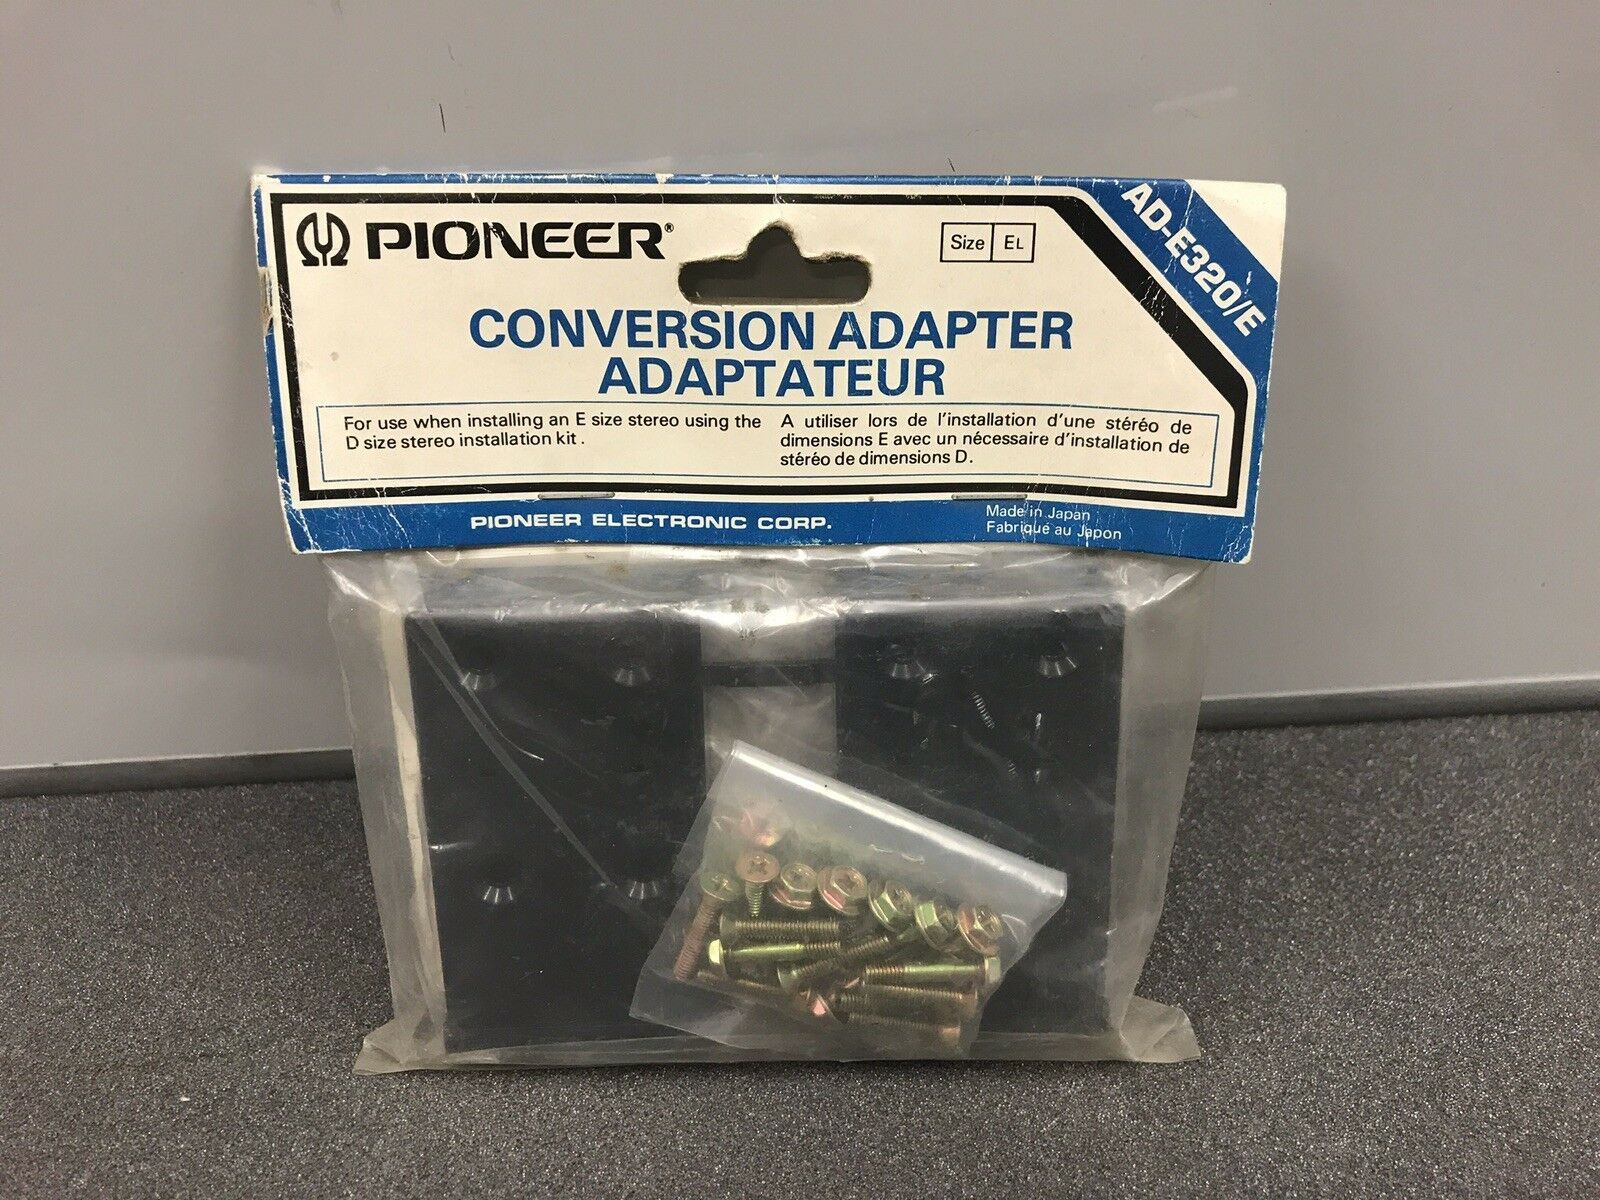 Pioneer Rare Old Conversion Adaptor For Old Component Centrate New Kit Ad-E320/e